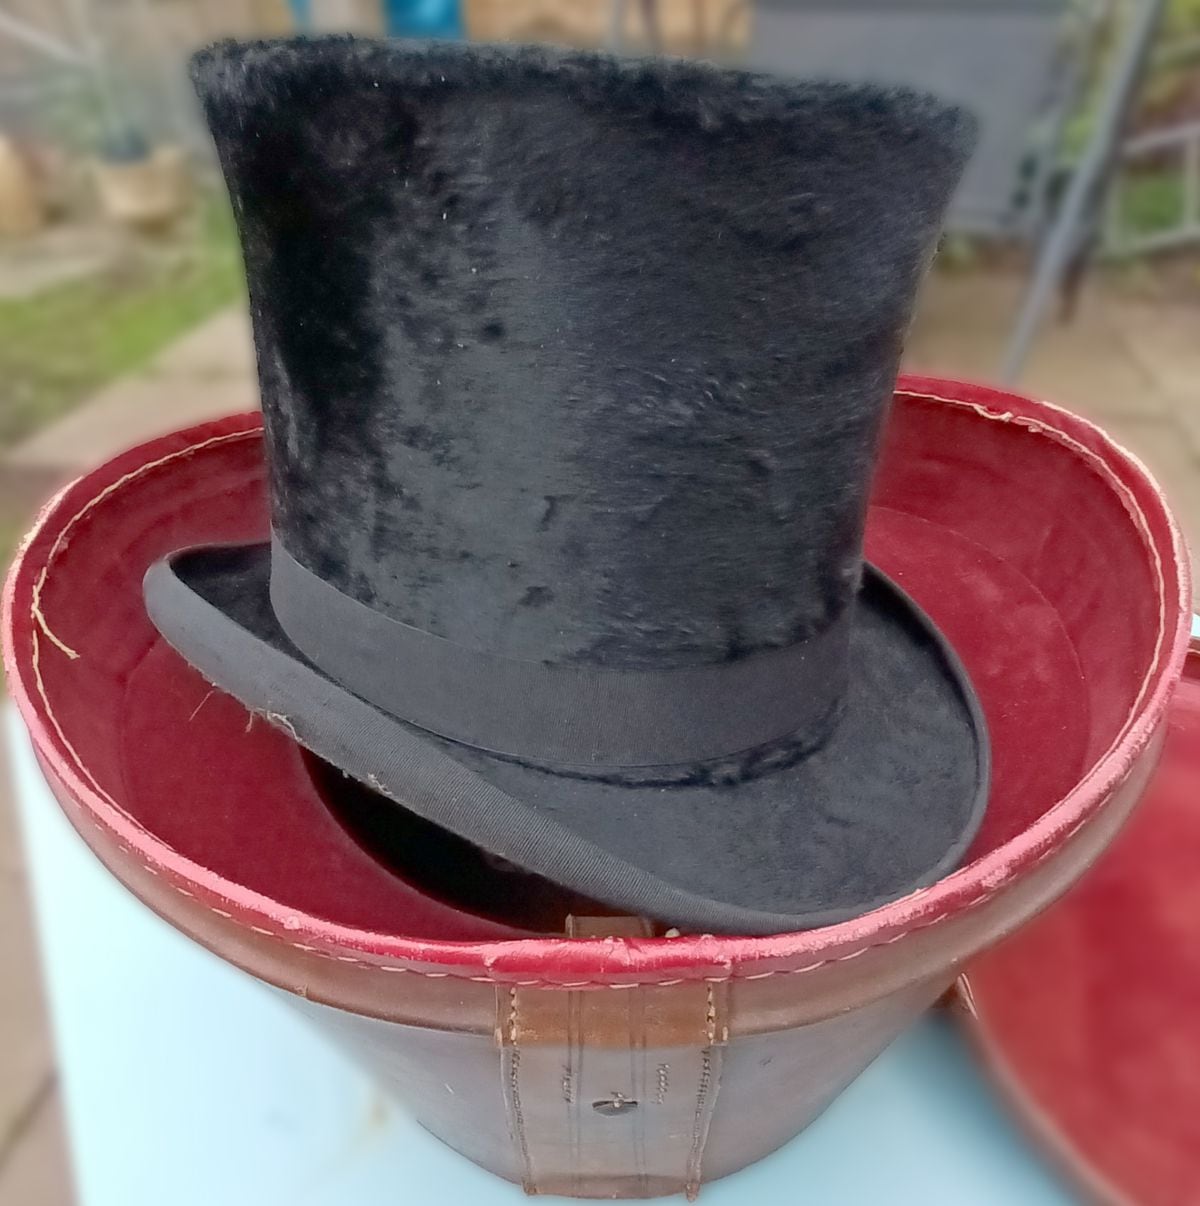 The top hat from around 120 years ago.